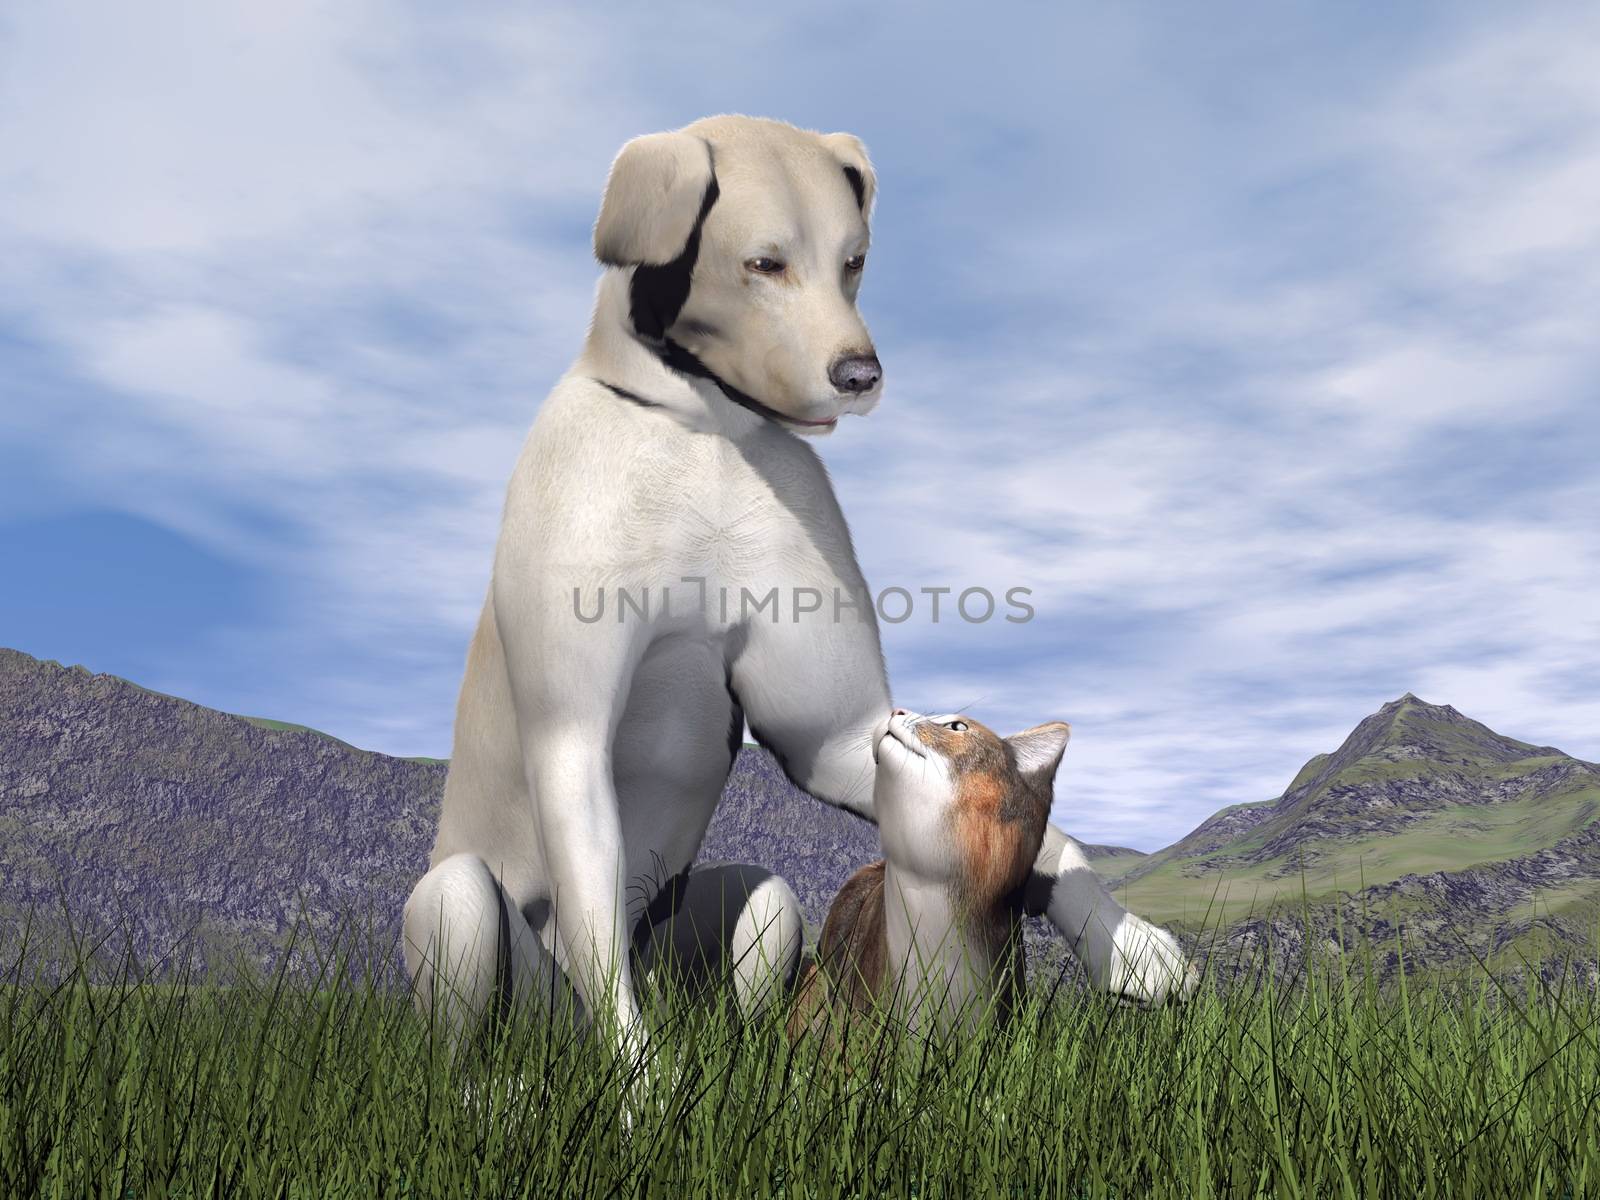 Dog and cat friendship in the grass by day - 3D render